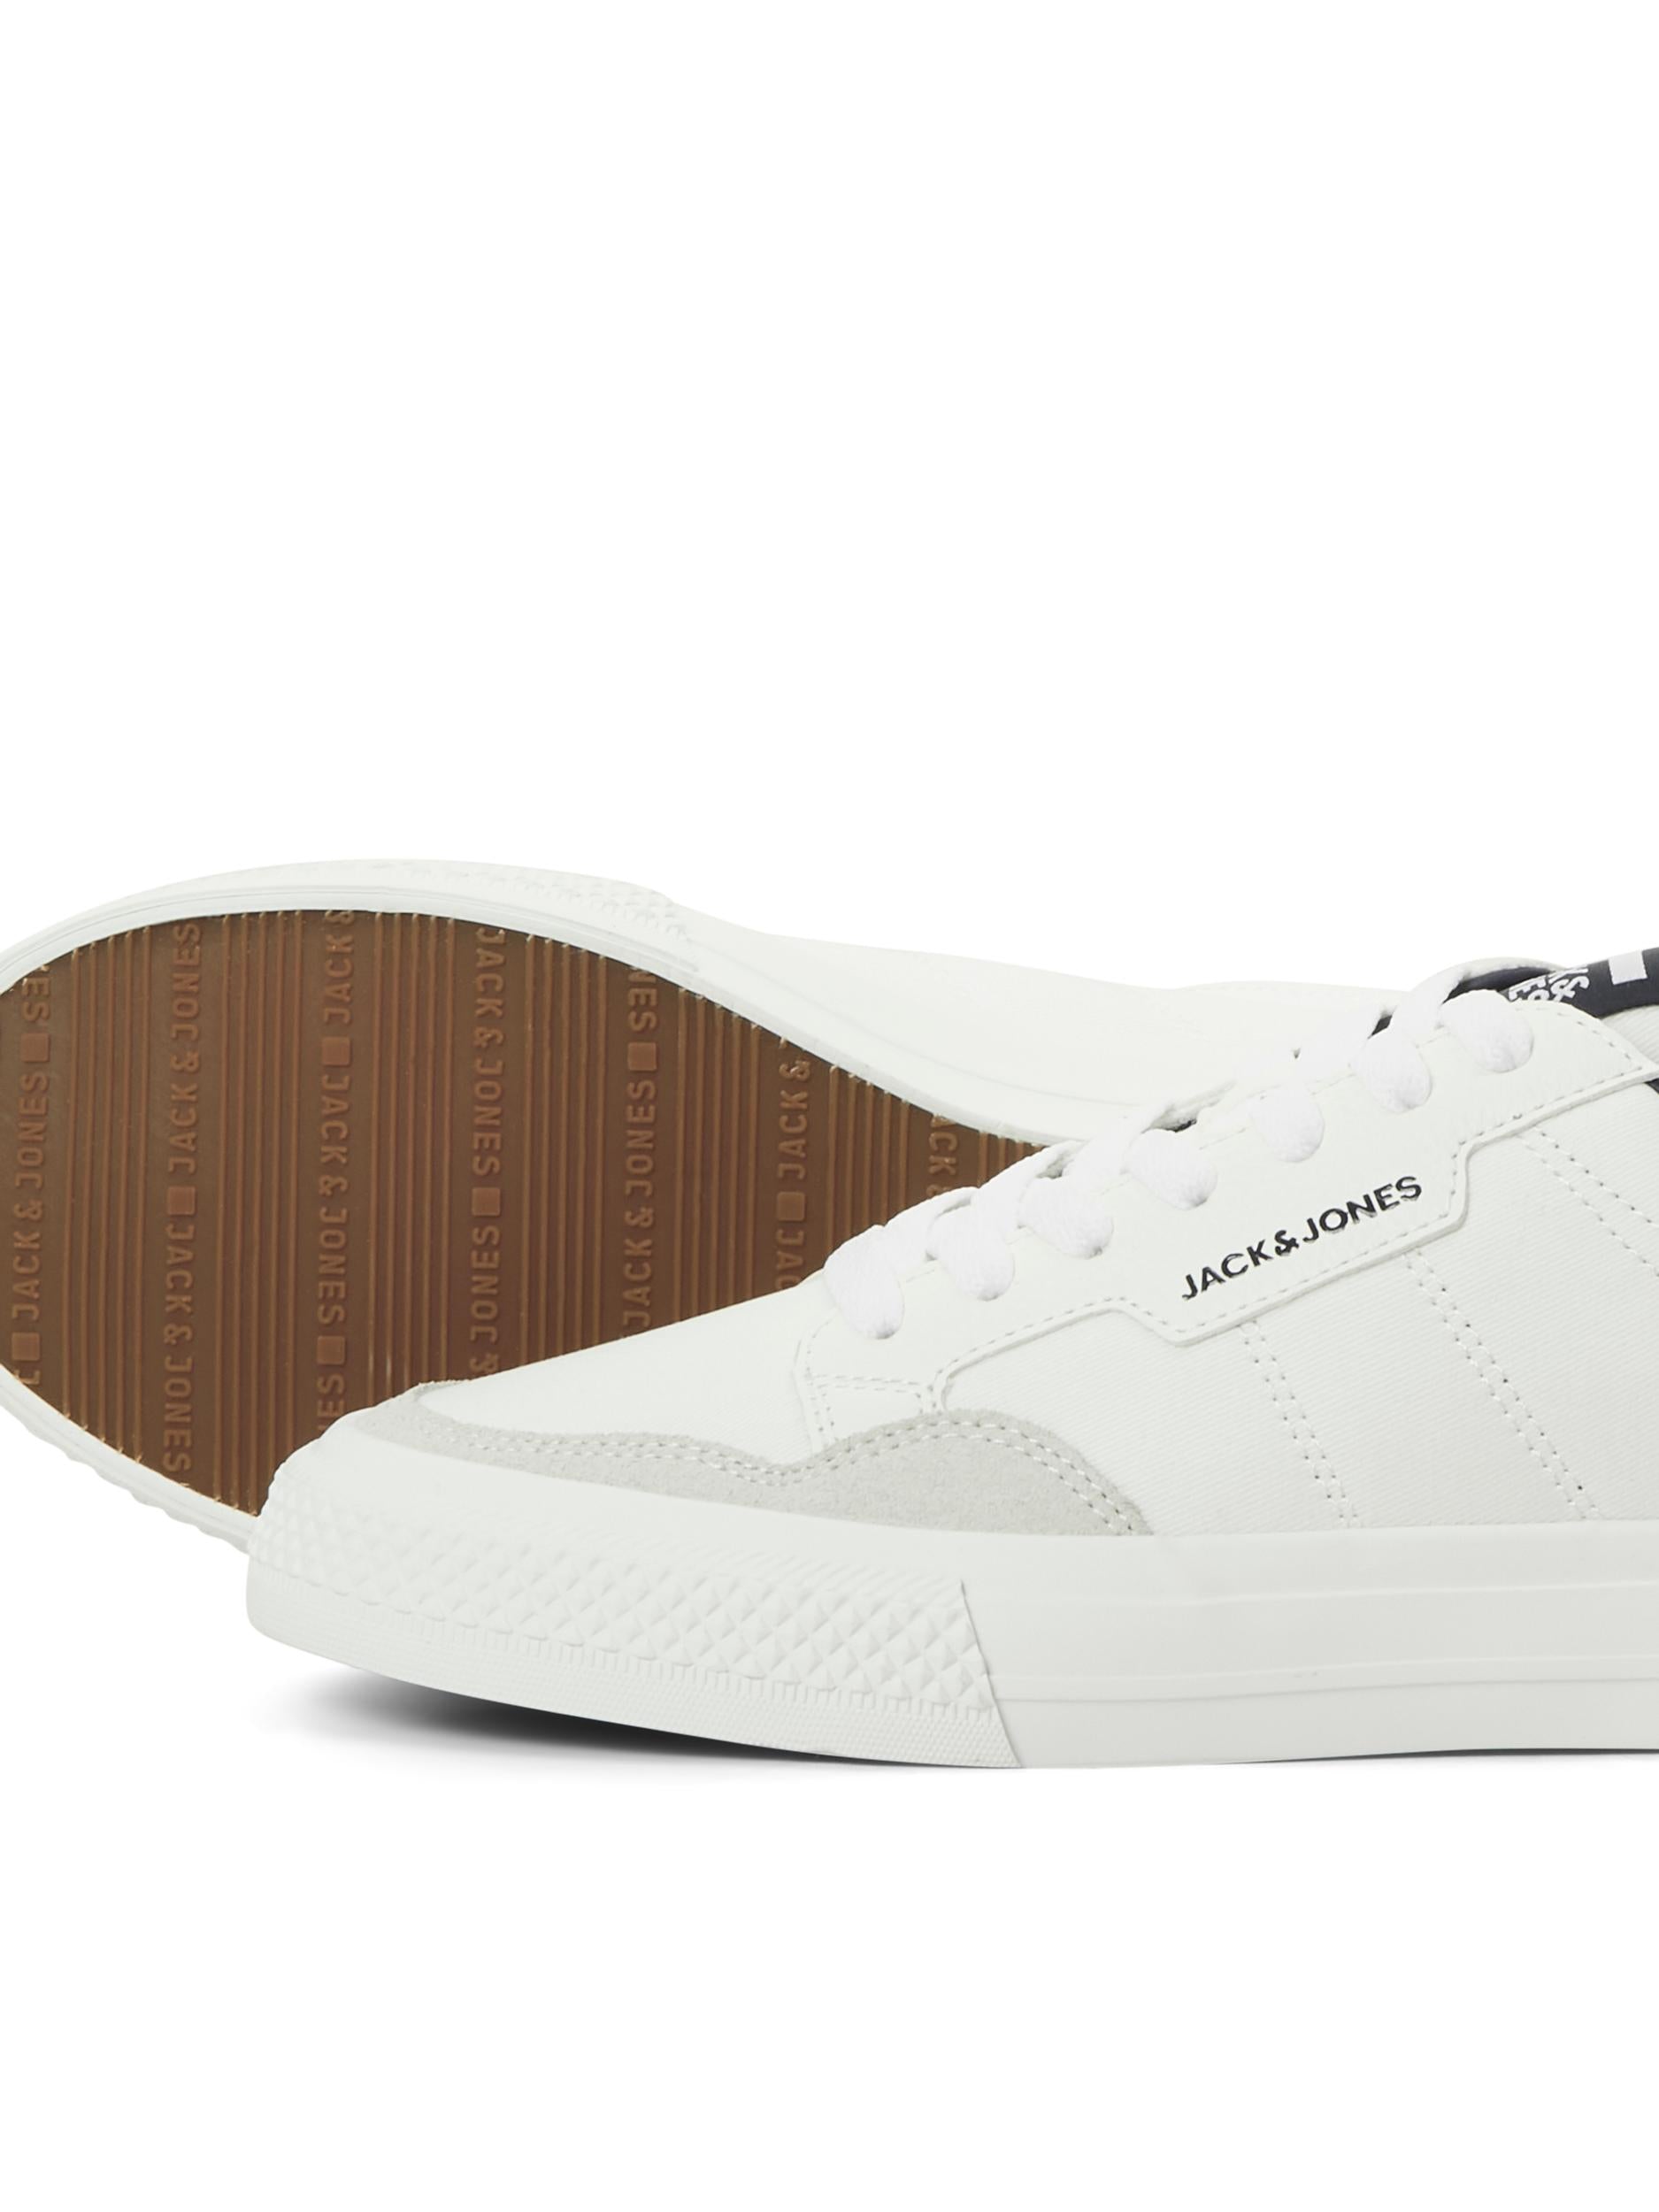 Men's Morden Combo Trainers - White/Navy-Sole View